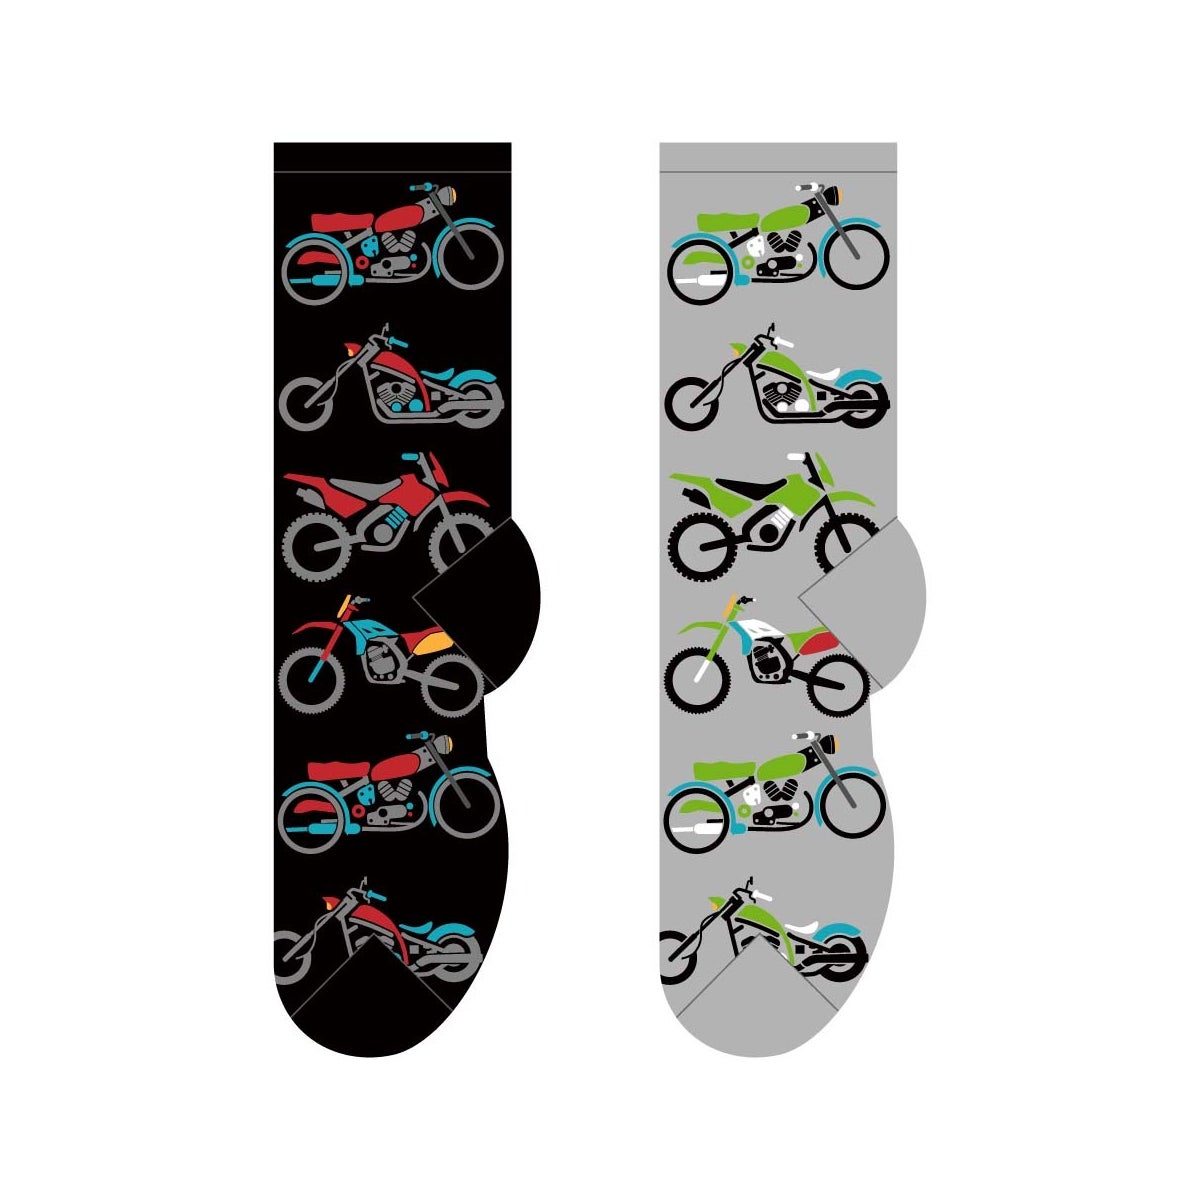 Motorcycles - 6 pairs each of 2 colours